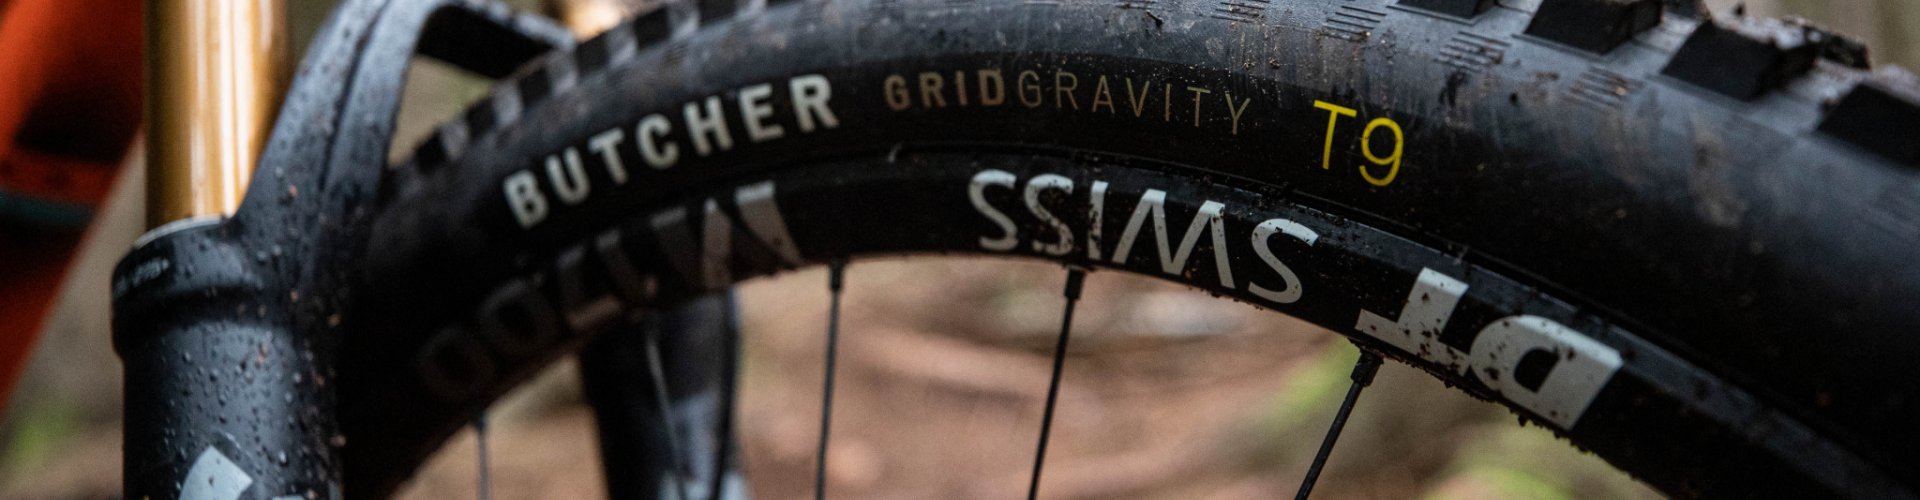 Specialized Butcher Grid Gravity T9 compound tyre test